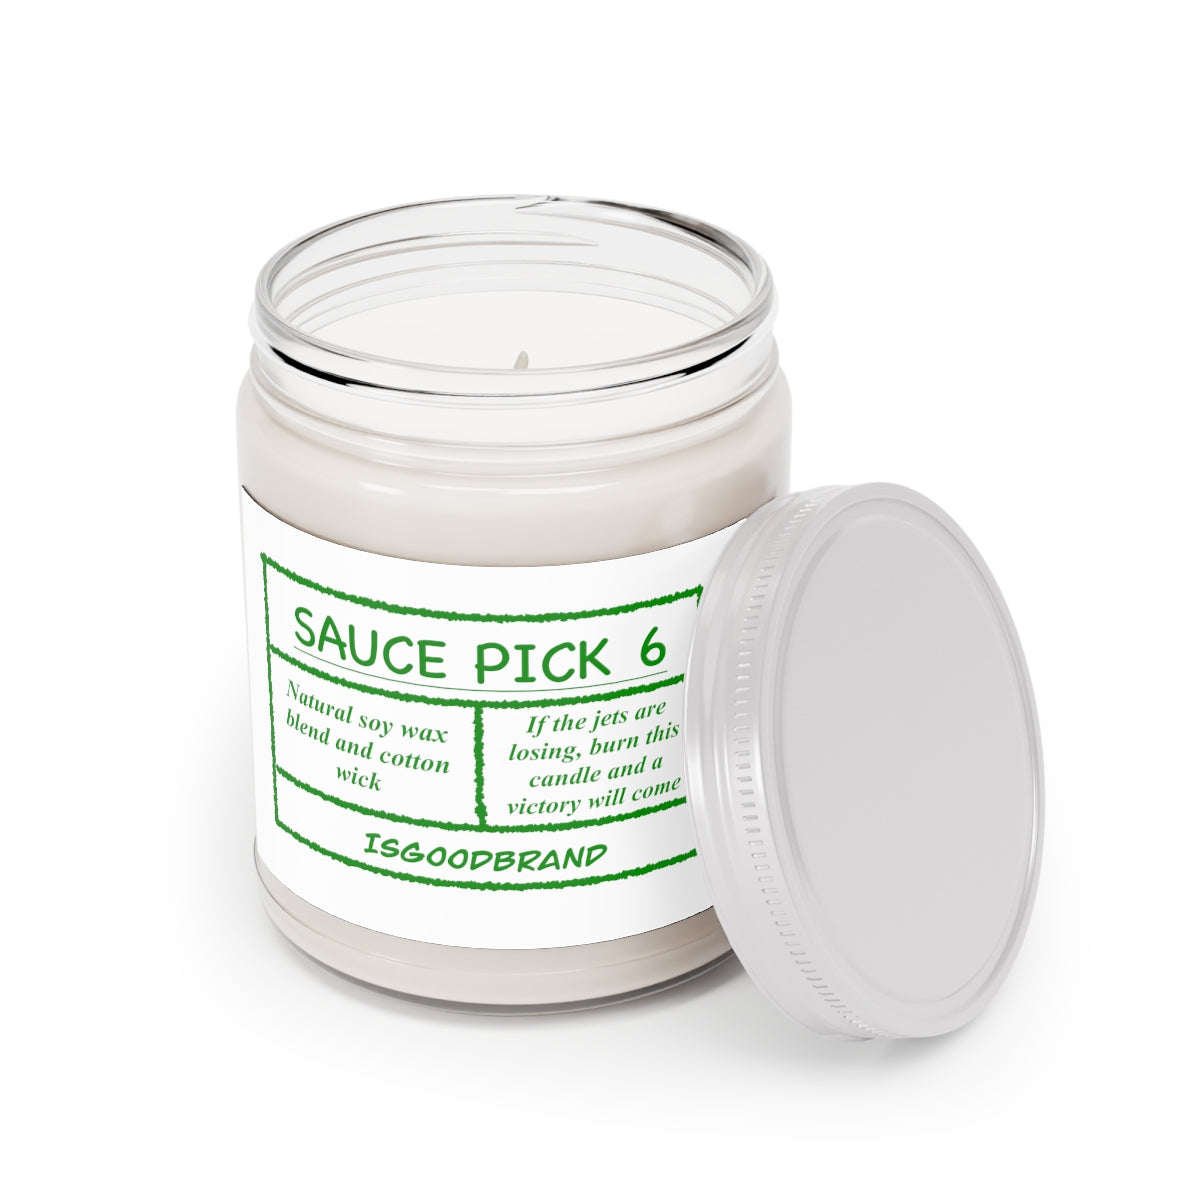 Sauce Pick 6 Scented Candles, 9oz - IsGoodBrand